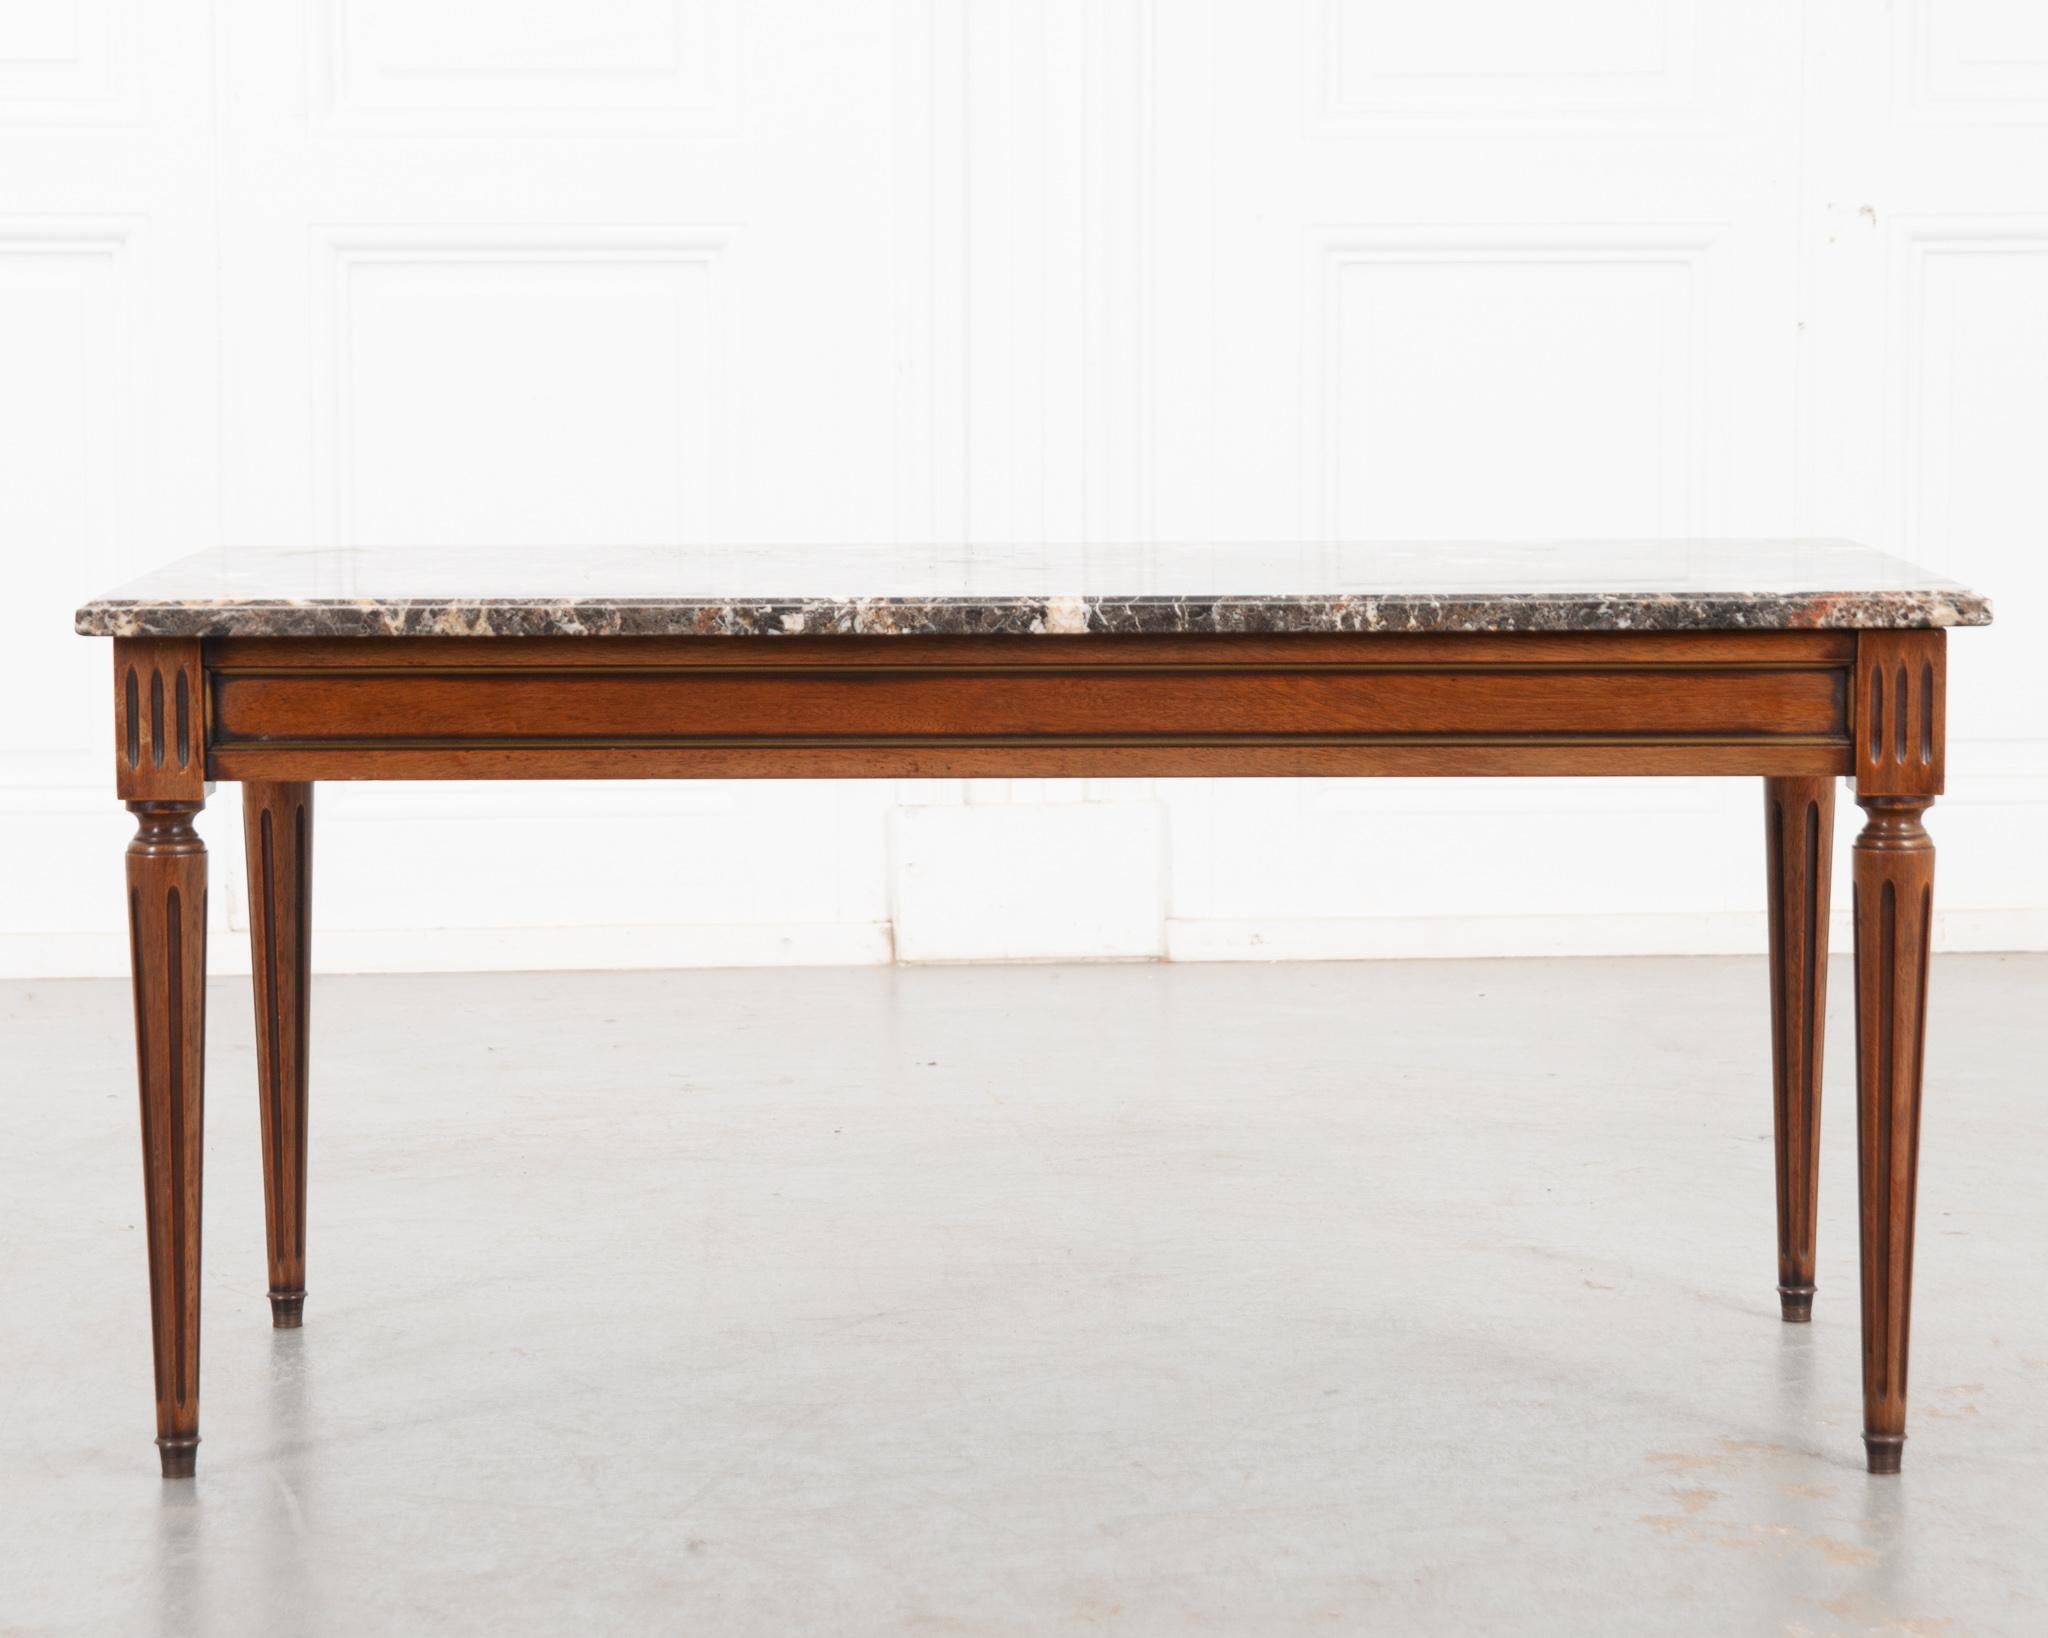 This vintage mahogany coffee table base is in the Louis XVI style and topped with an outstanding piece of colorful marble. It features a brass trimmed paneled apron with fluted, turned legs that taper to brass capped feet. A perfect low table ideal